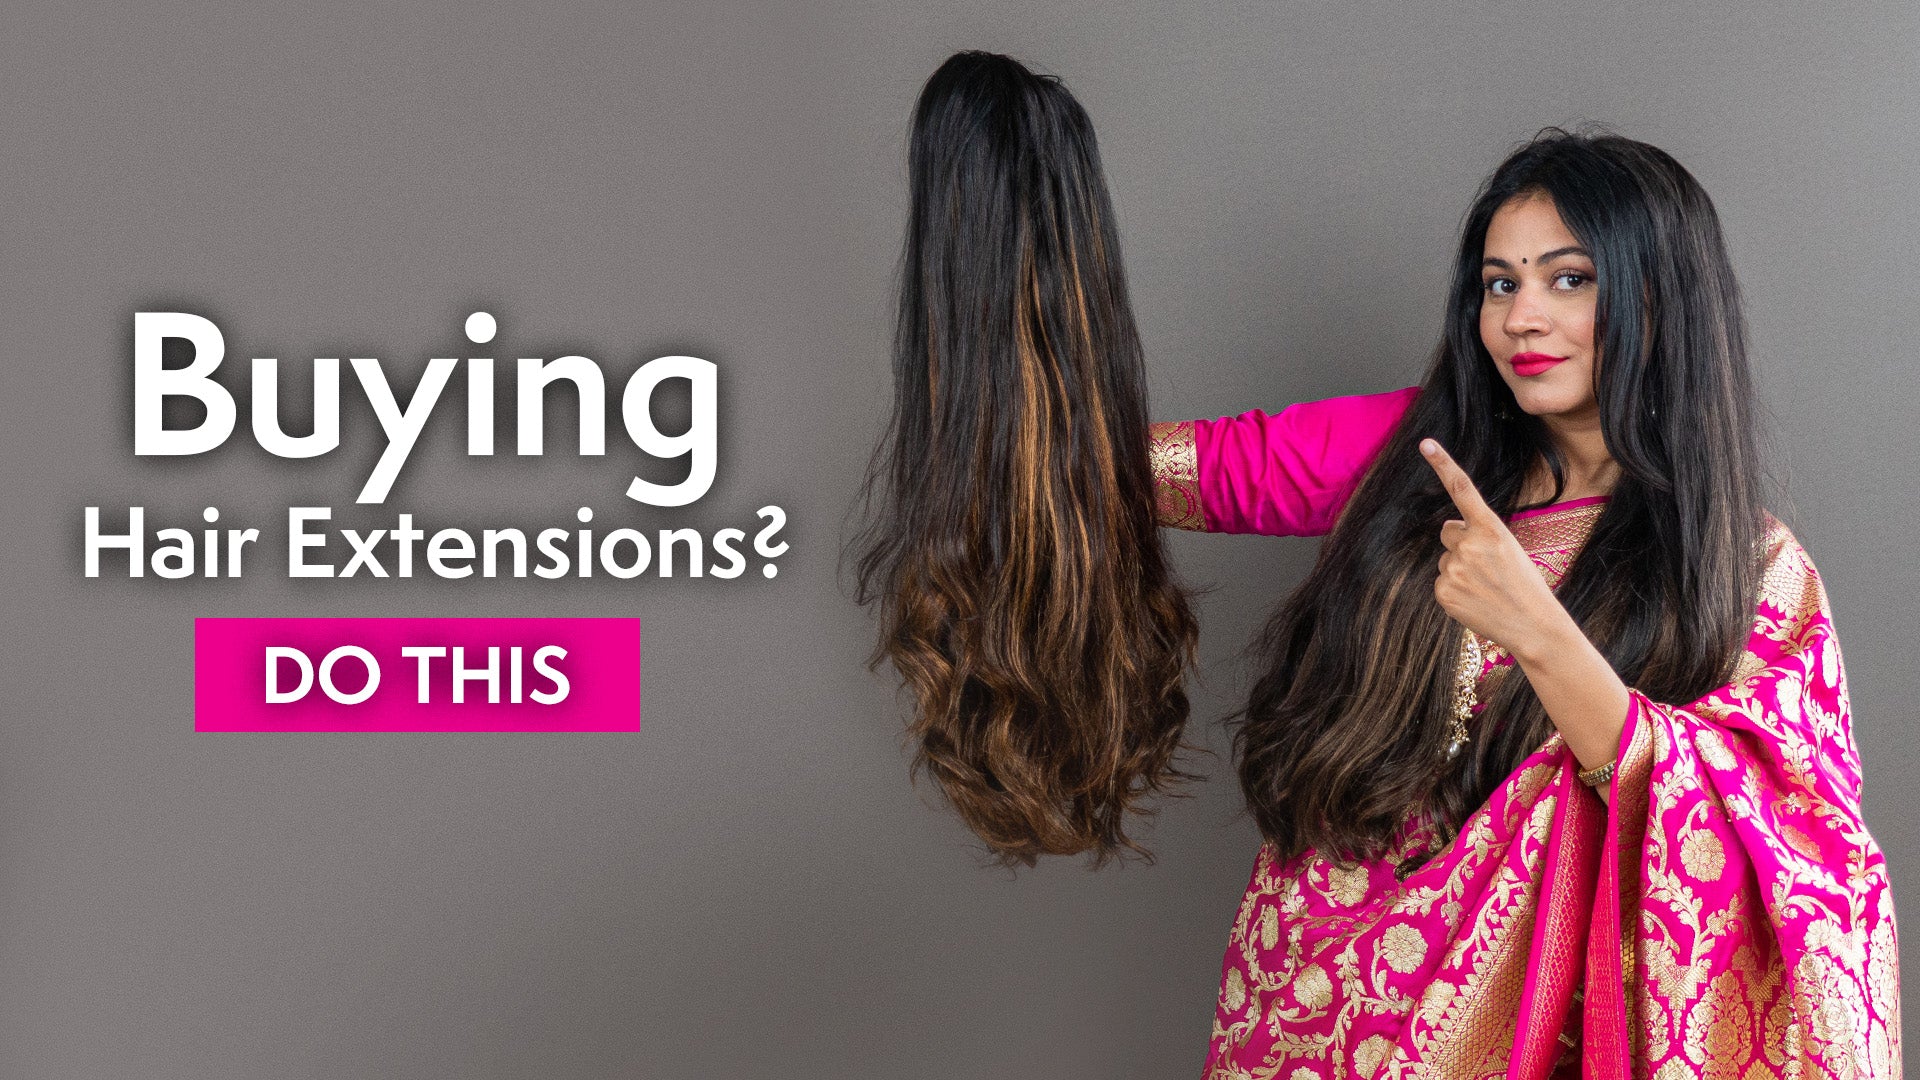 What to keep in mind while buying hair extensions and how to make sure they last longer?